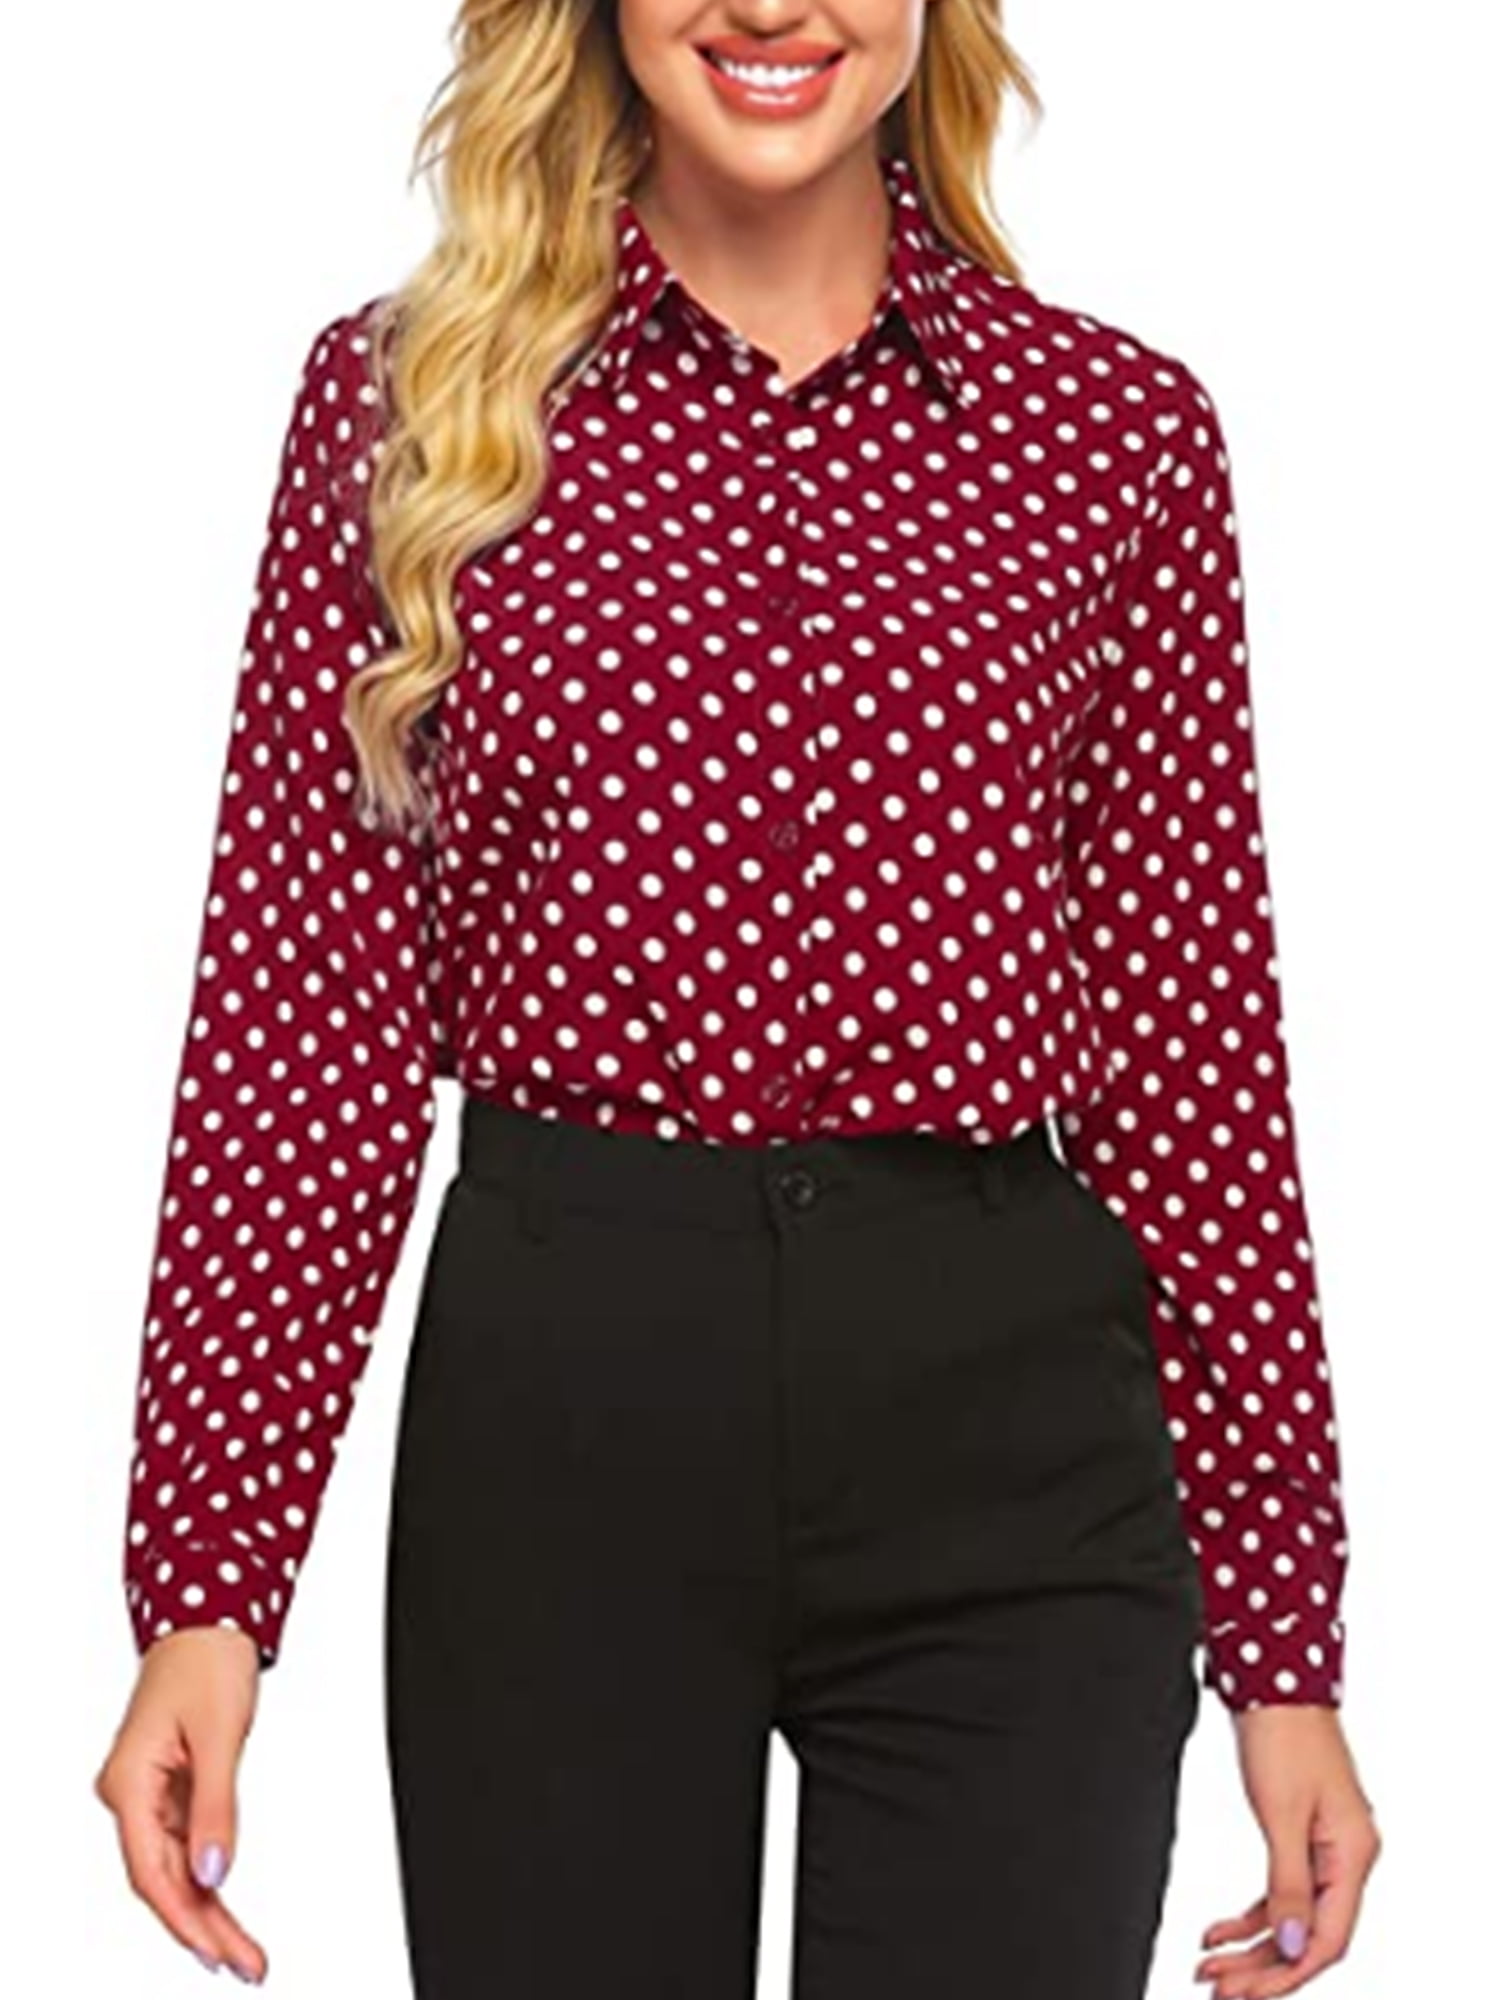 UK Womens Polka Dot Shirt 3/4 Sleeve Blouse Ladies Button Down Casual Party Tops 